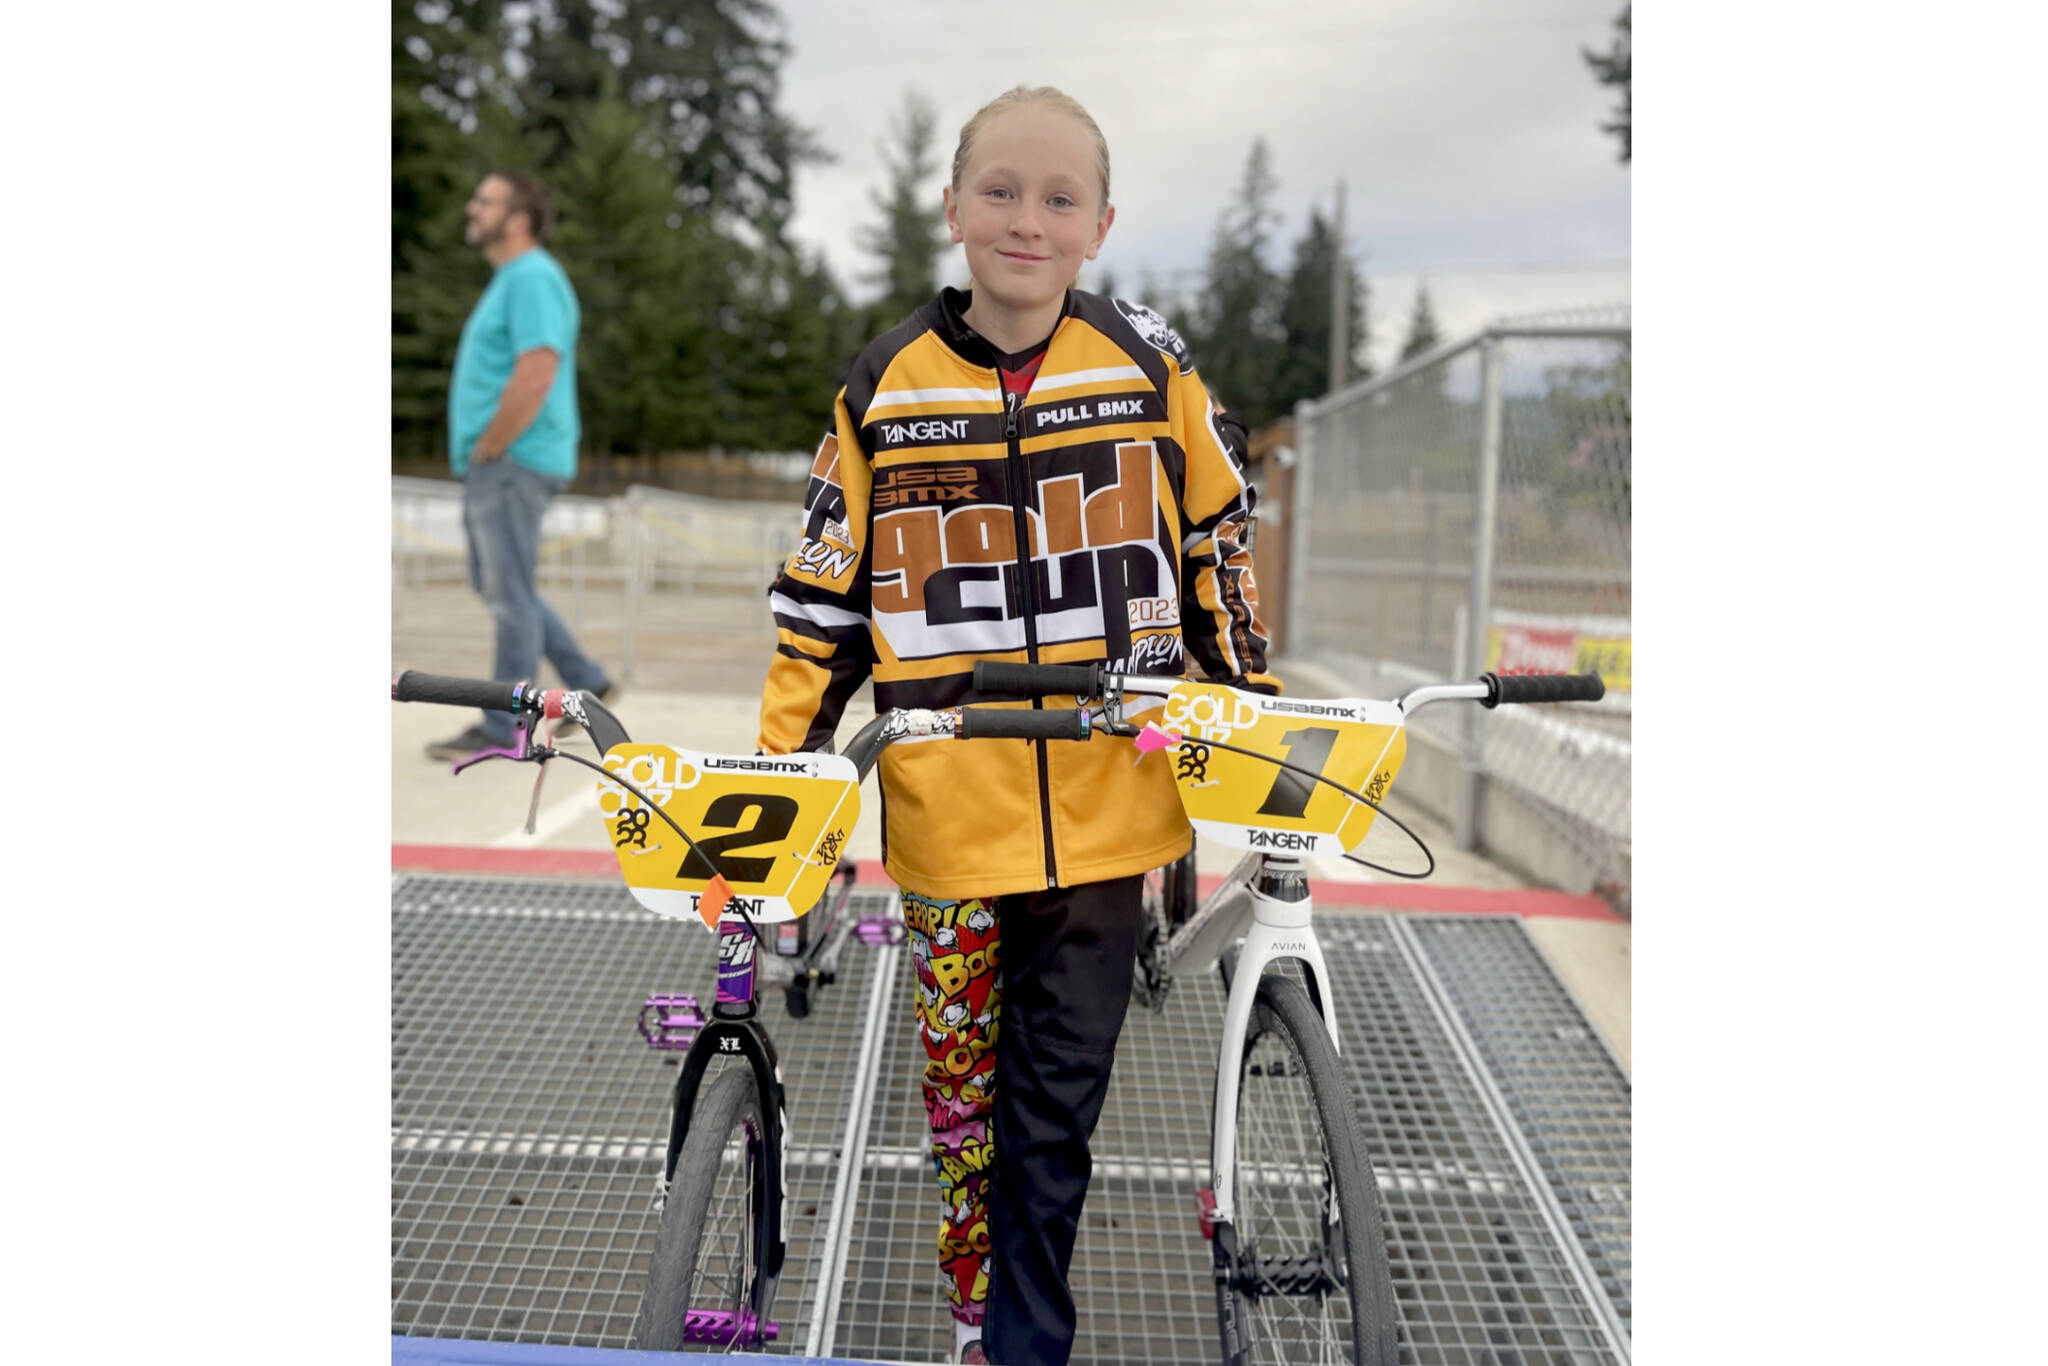 Teyah Elofson-Cross, 10, of Port Angeles won medals at the Gold Cup Finals recently and will be competing this weekend at the Washington state BMX finals at the Lincoln Park BMX track. (USA BMX)